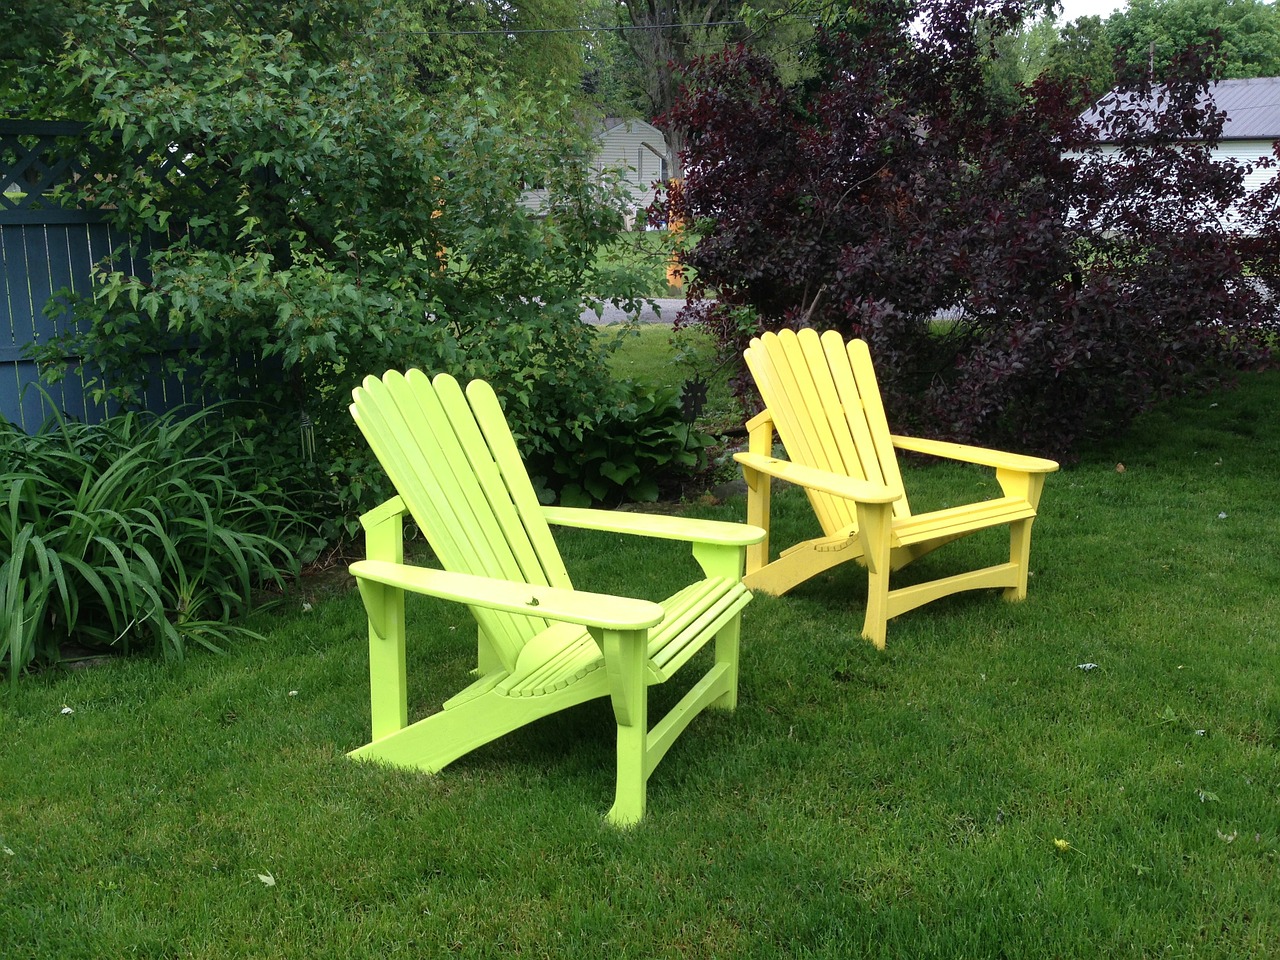 Nothing can make your Home Ready for Summer quite like Adirondack chairs ... photo by CC user LRMoore on pixabay